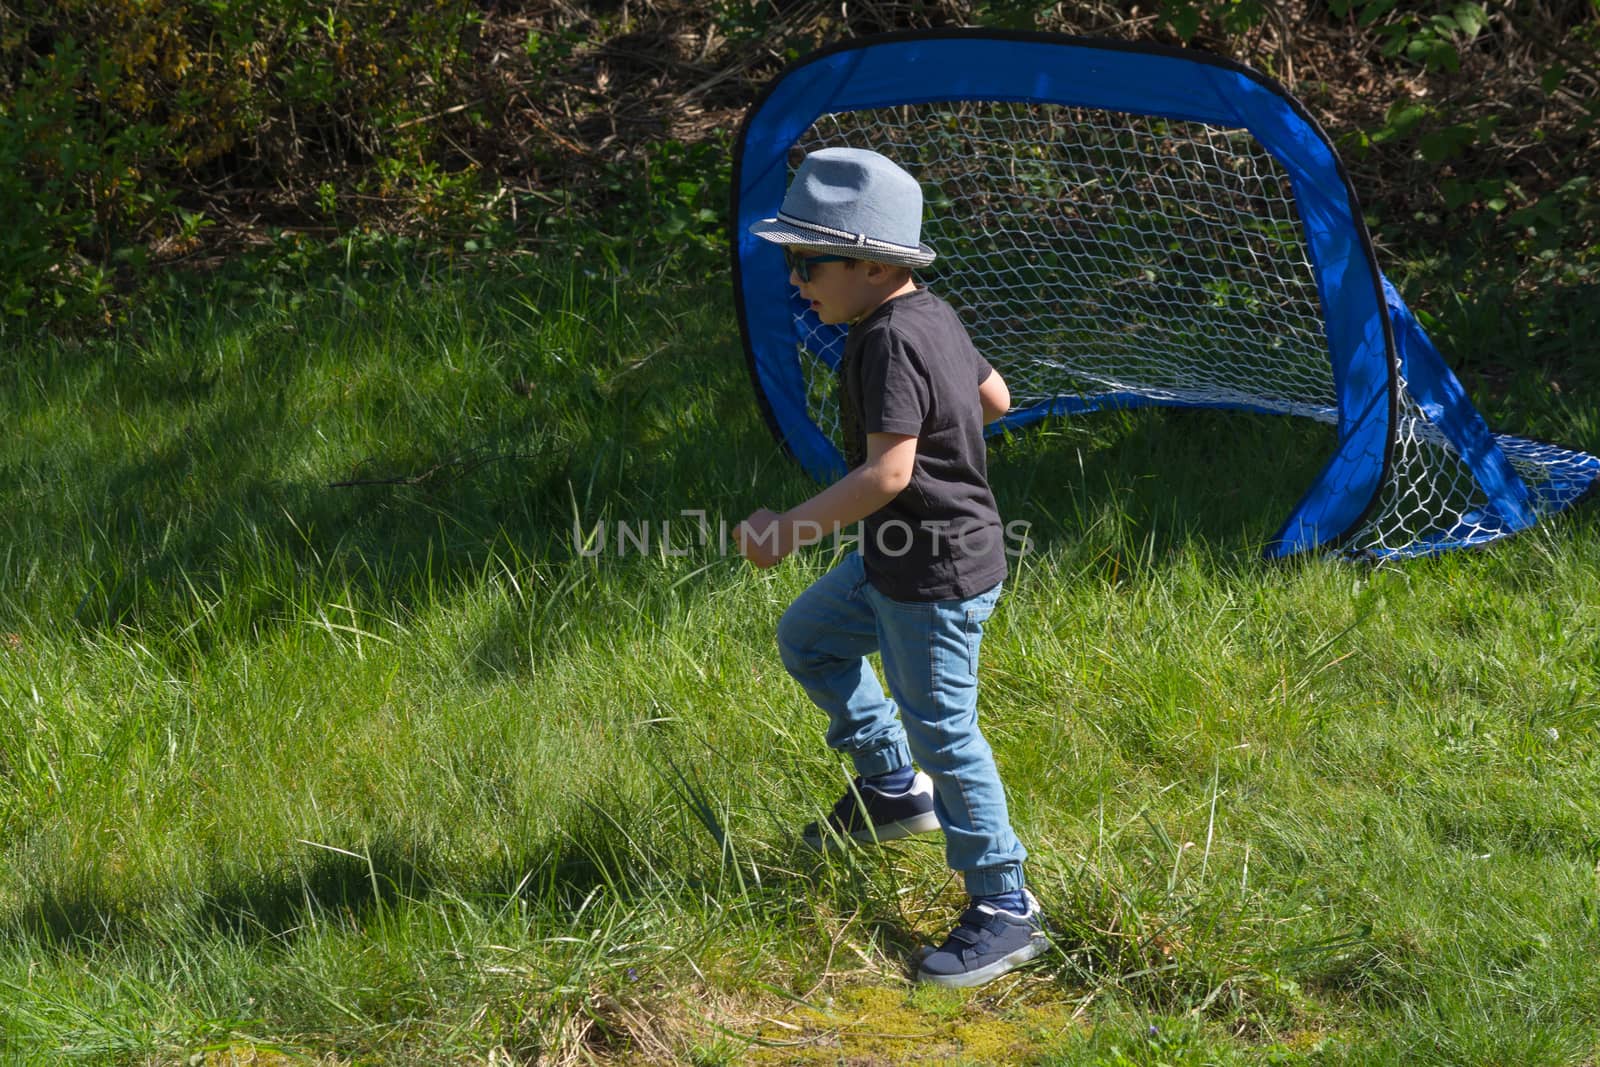 Little boy with hat and sunglasses while playing football in a garden